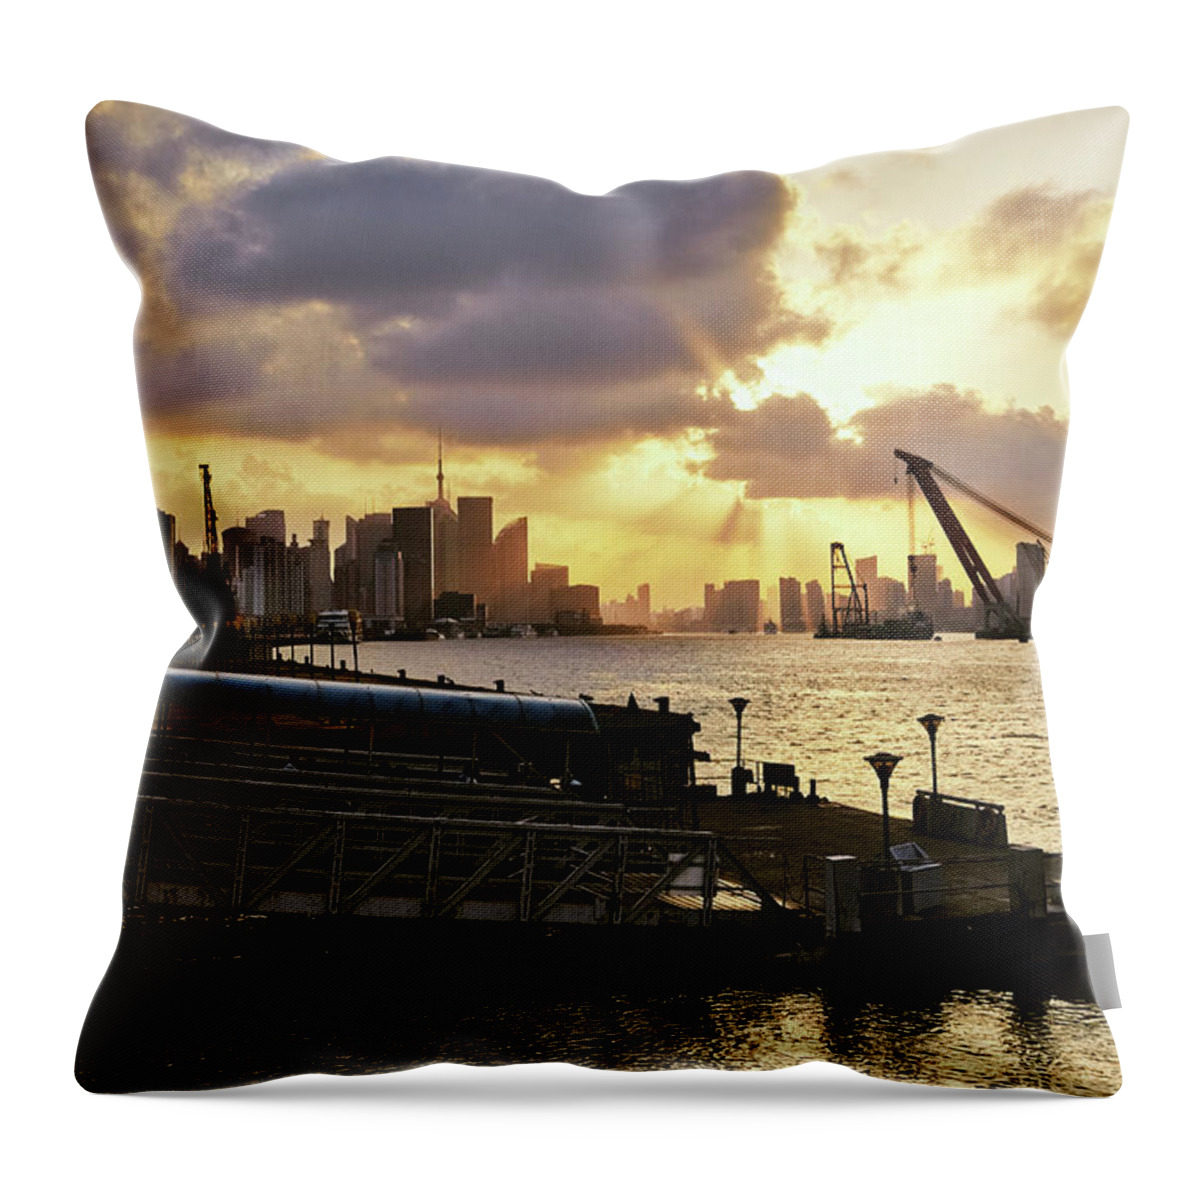 Tranquility Throw Pillow featuring the photograph The Ferry by Blackstation